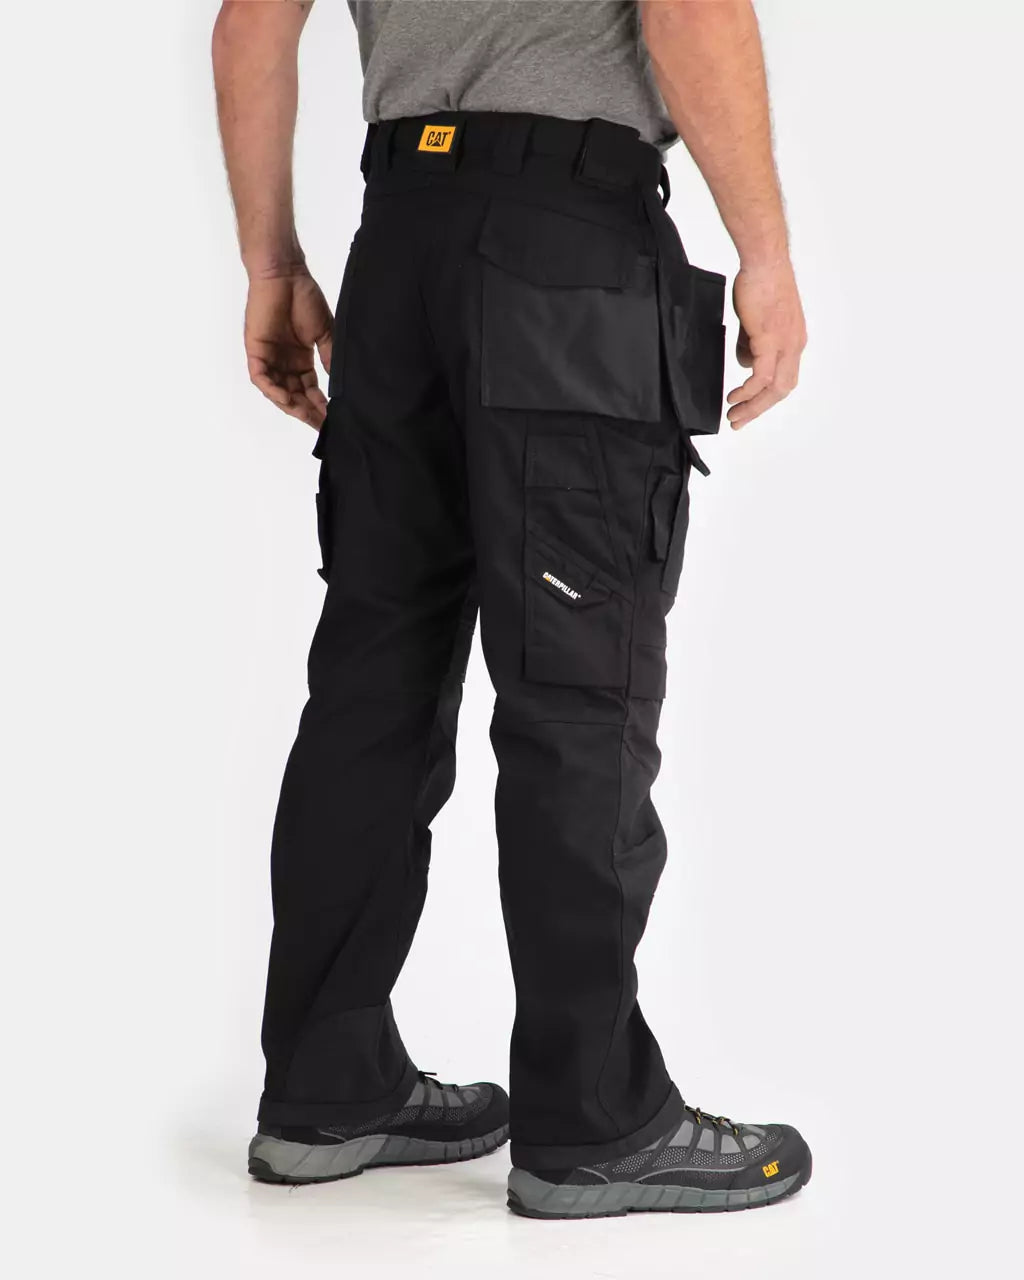 CAT Workwear Mens Essentials Stretch Knee Pocket Trousers | Brookes